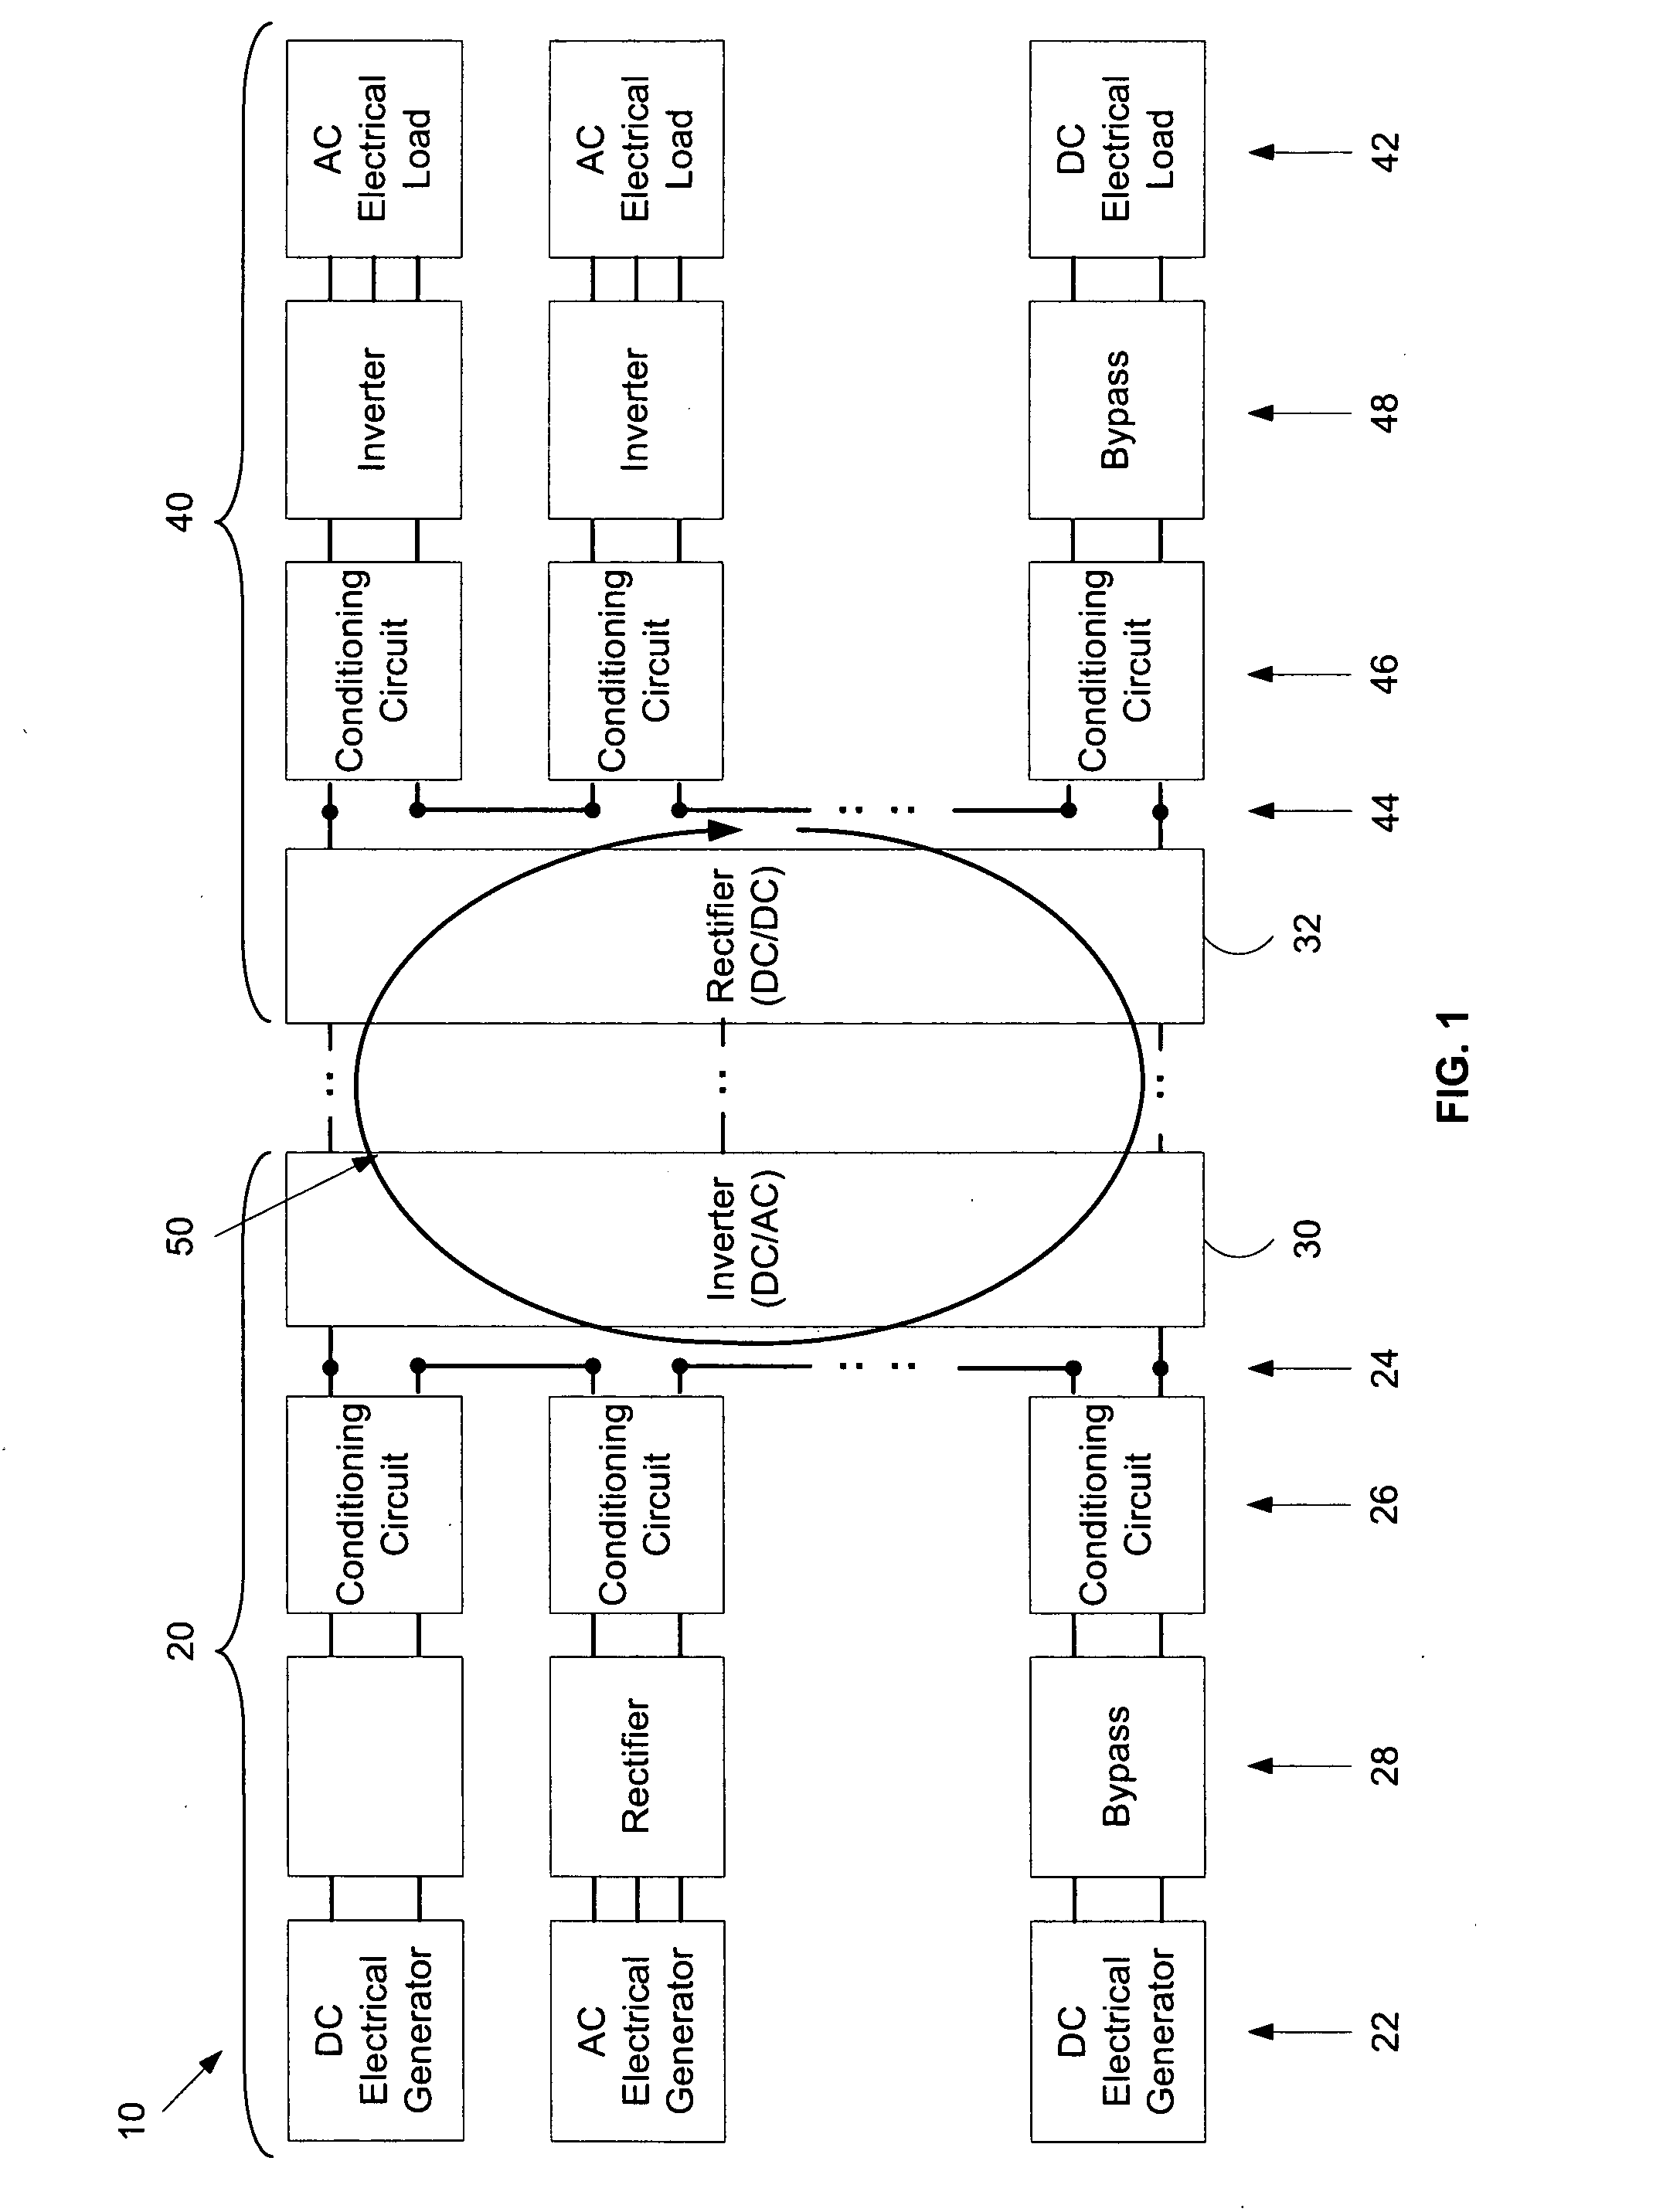 Electrical energy and distribution system